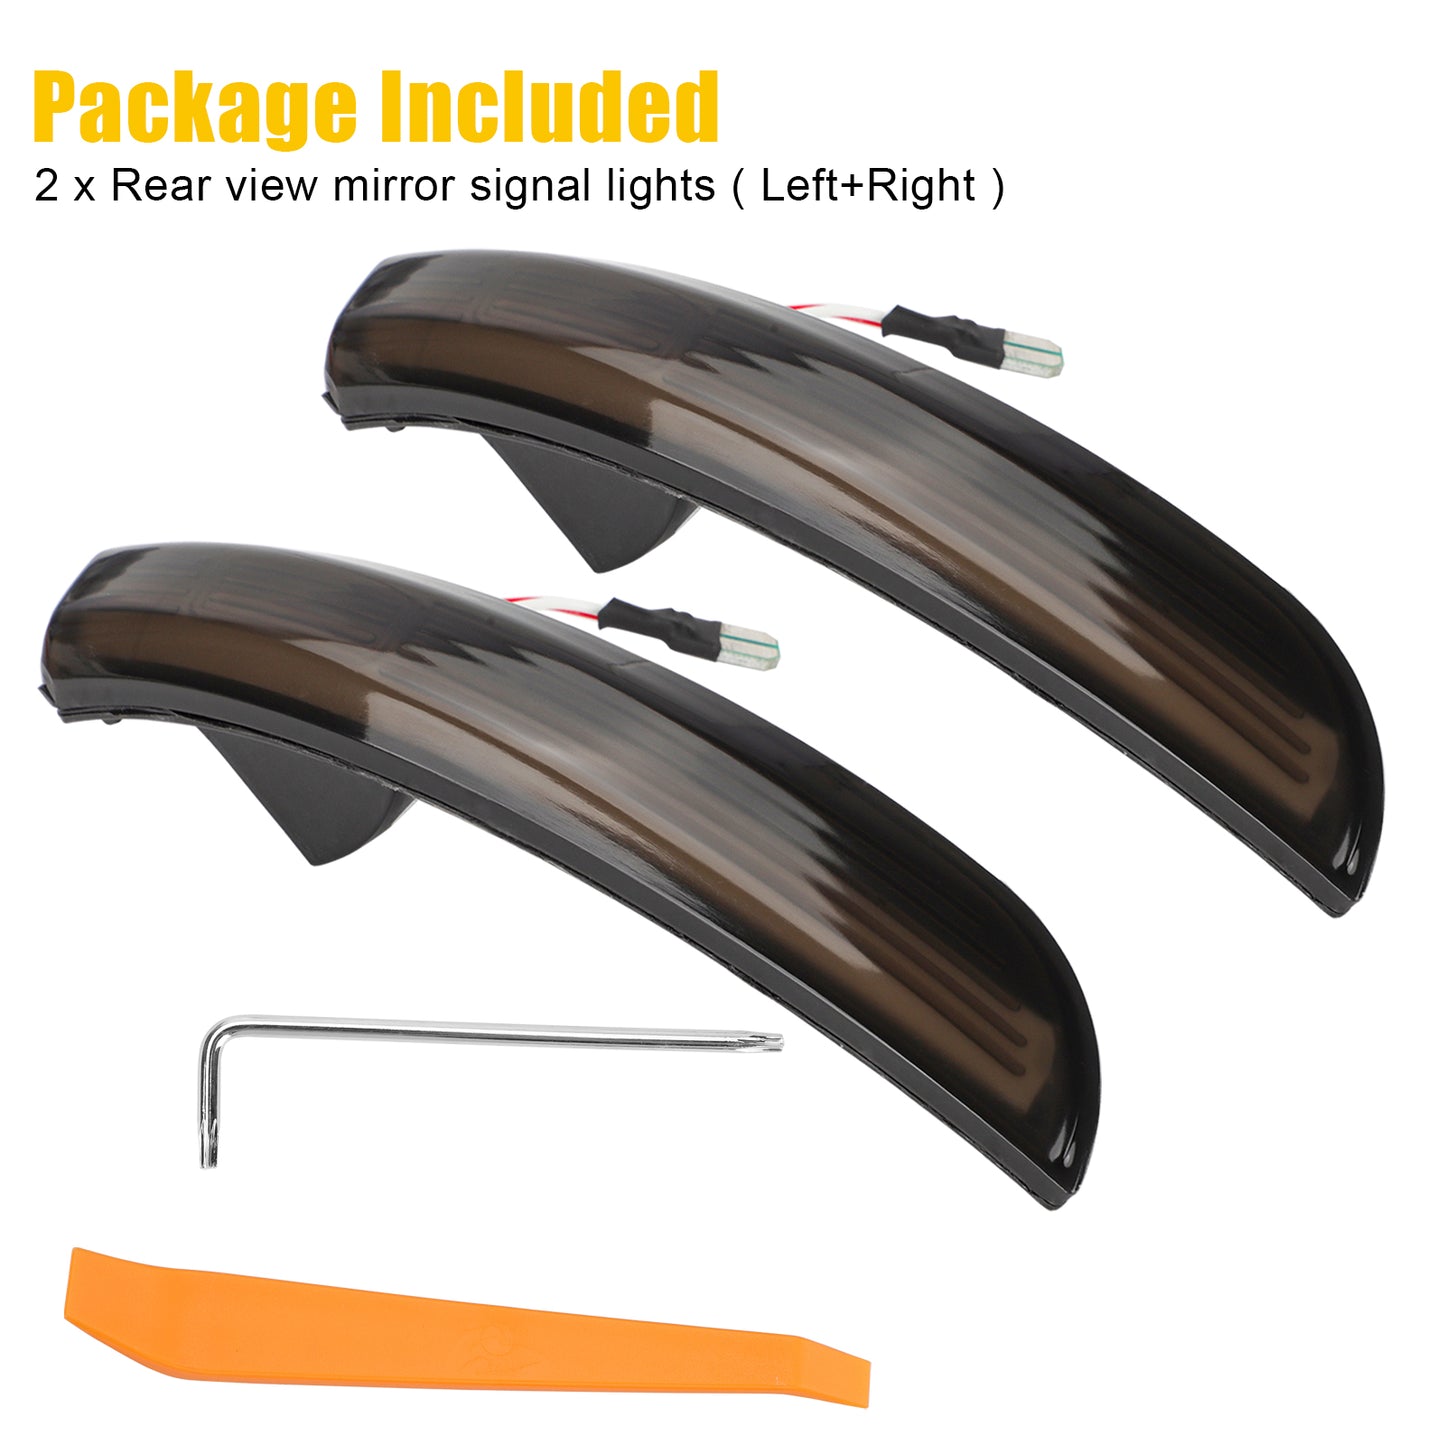 Car Side Mirror Turn Signal Lights - Premium LED Puddle Lights for Enhanced Visibility and Safety